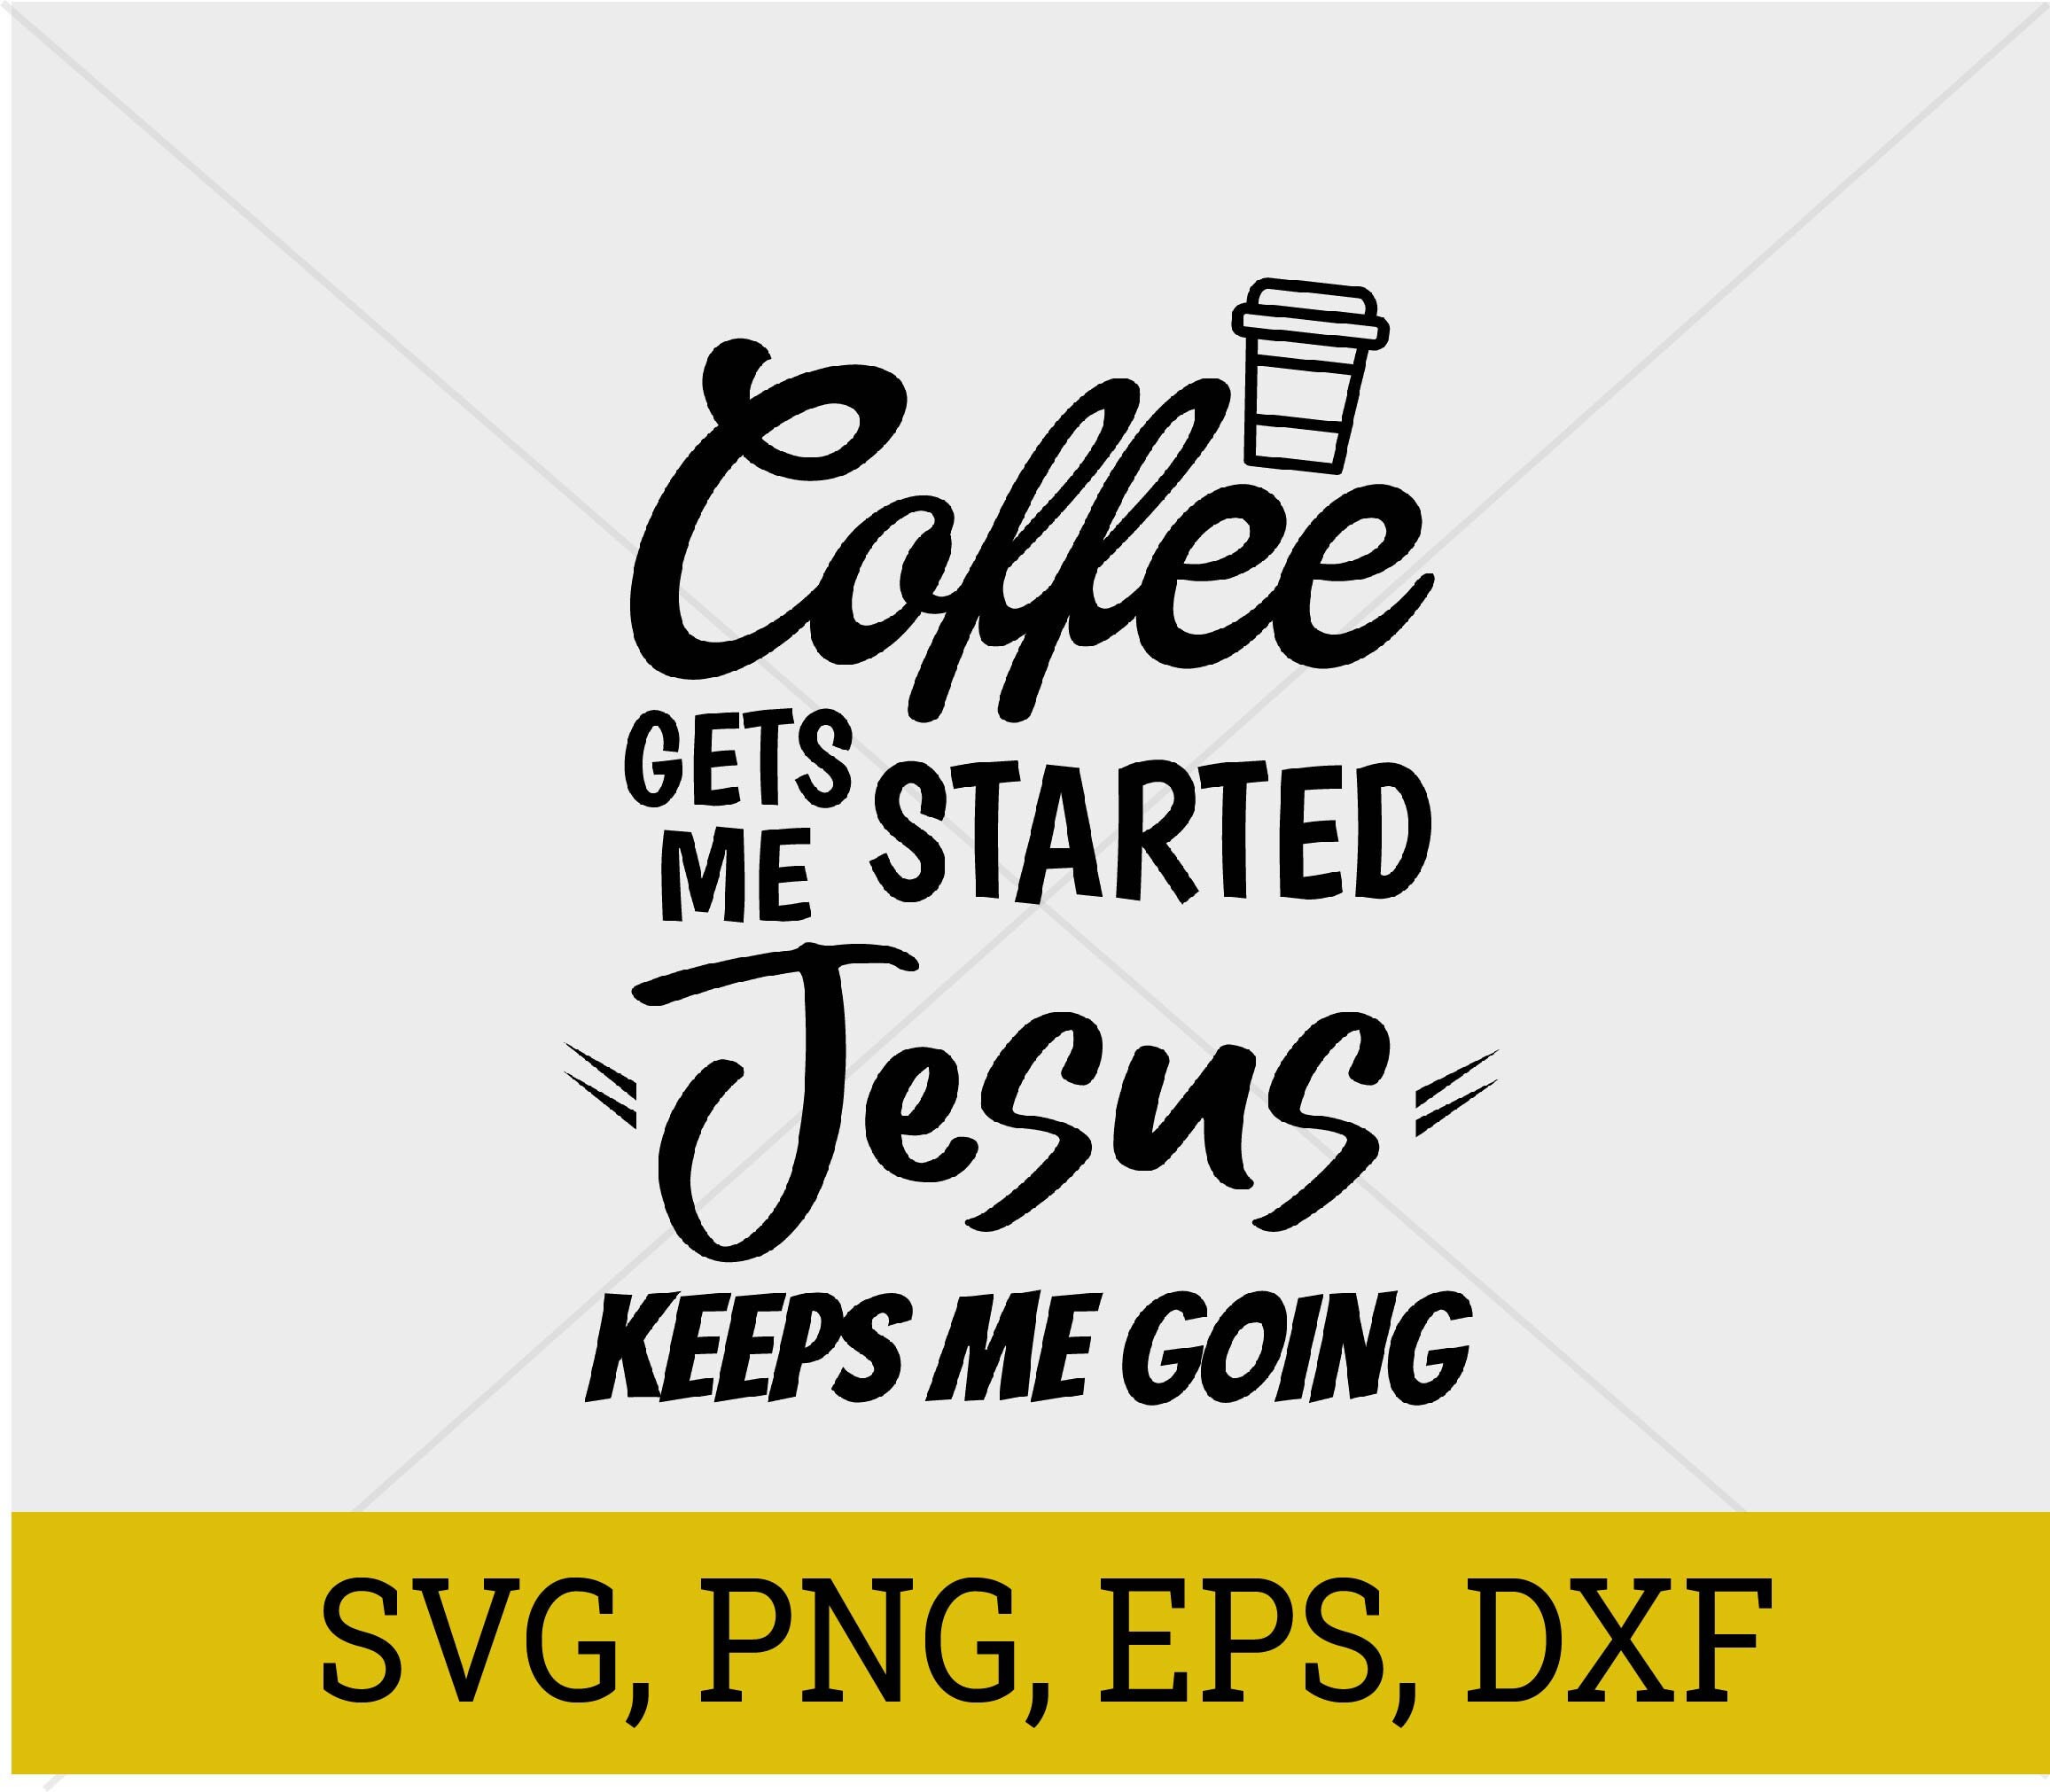 Coffee Gets Me Going Jesus Keeps Me Going SVG DXF PNG Religious Cut File for Cricut and Silhouette Coffee Cup Design